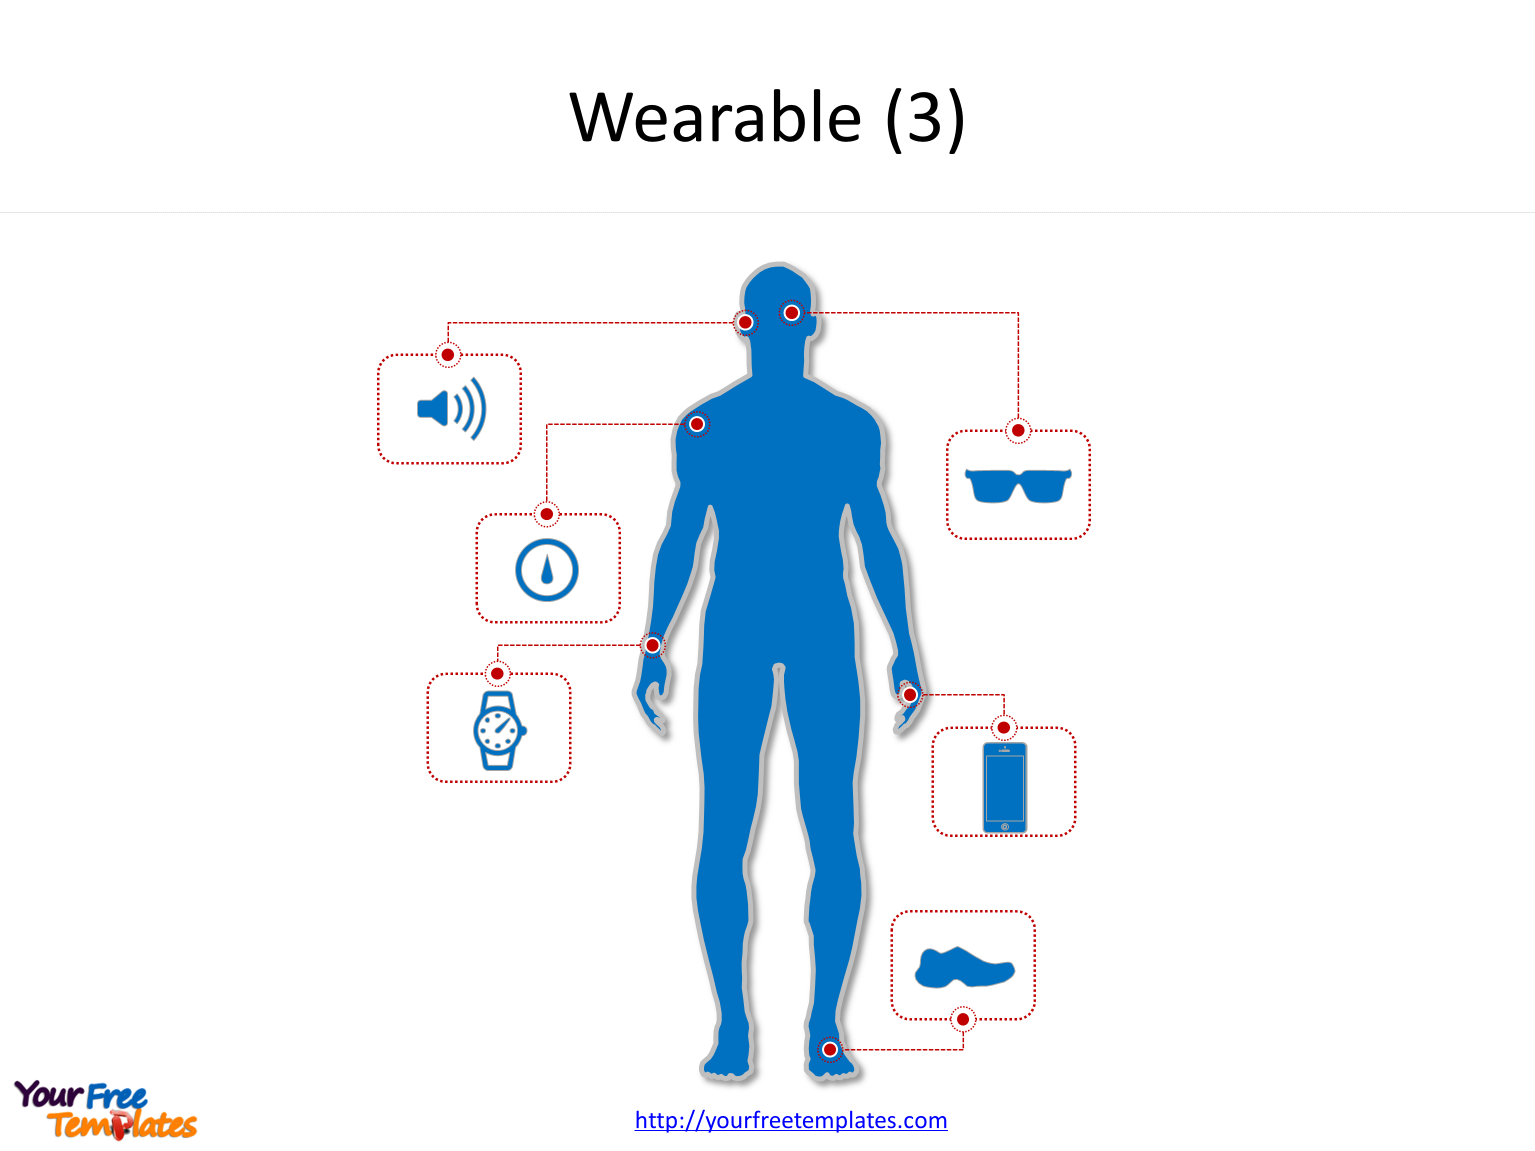 Internet of things with icons and human body to illustrate what is the Internet of things for wearable tech